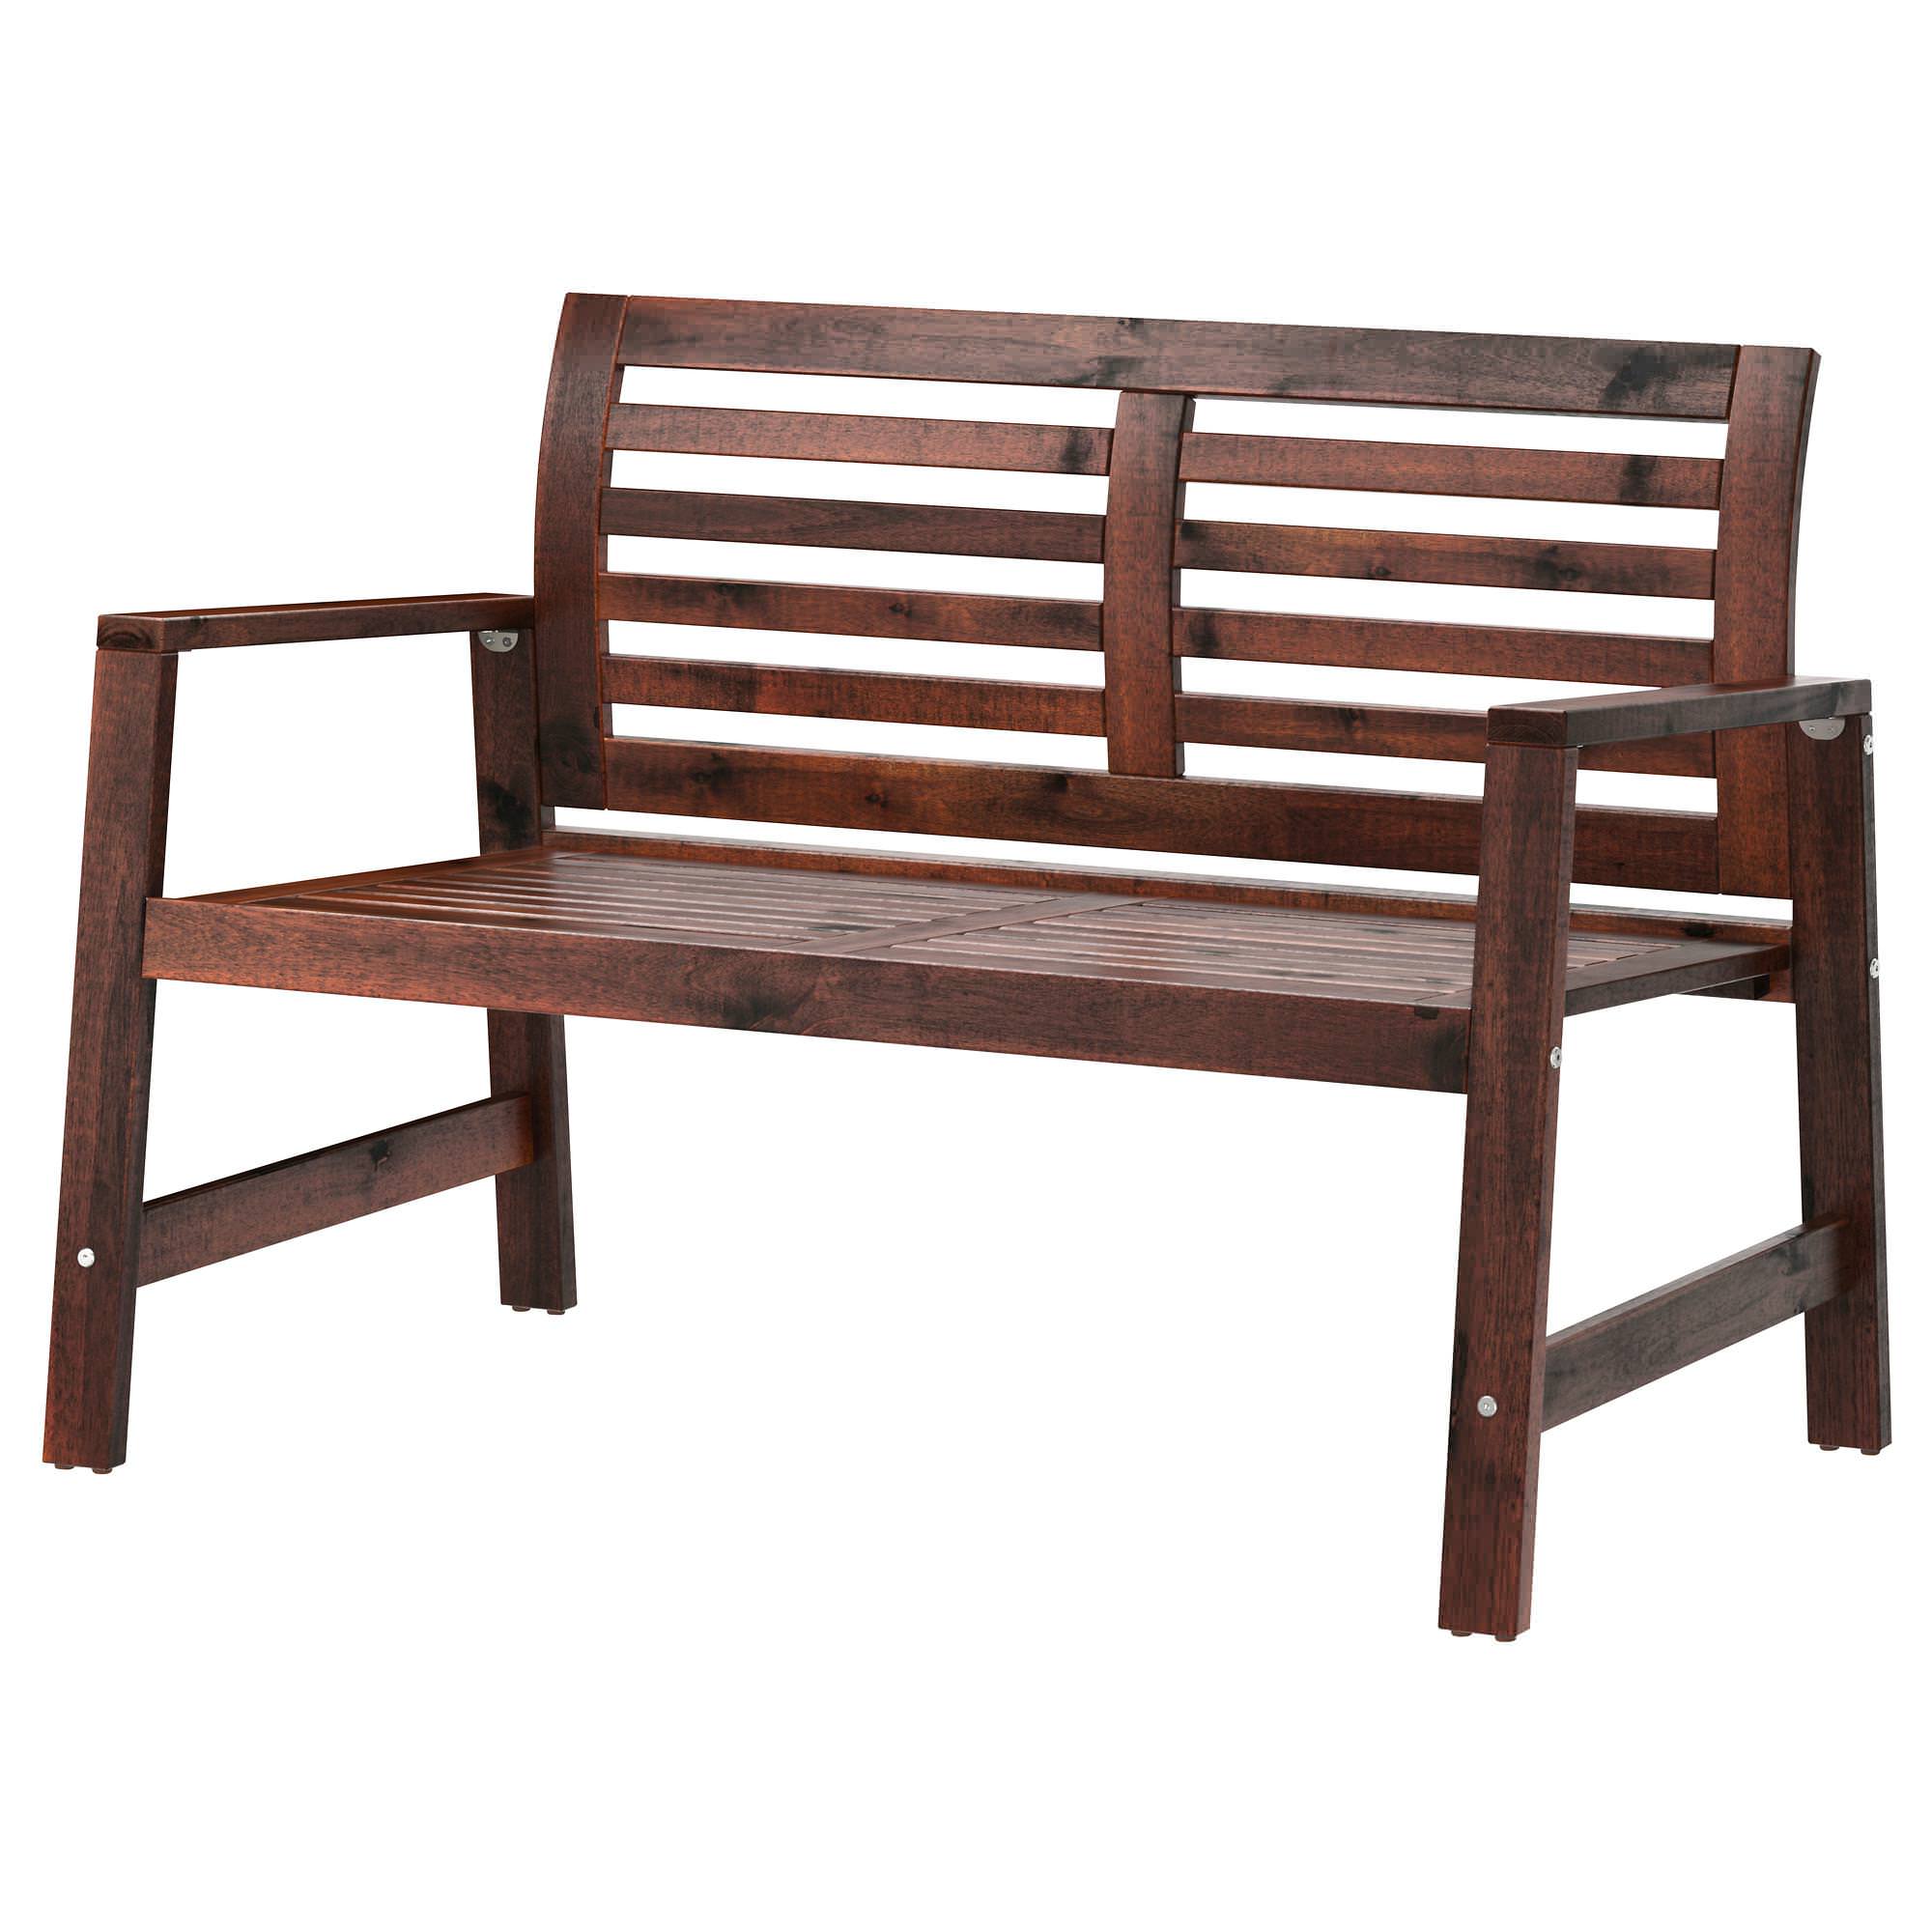 Image of: Outdoor Furniture Bench